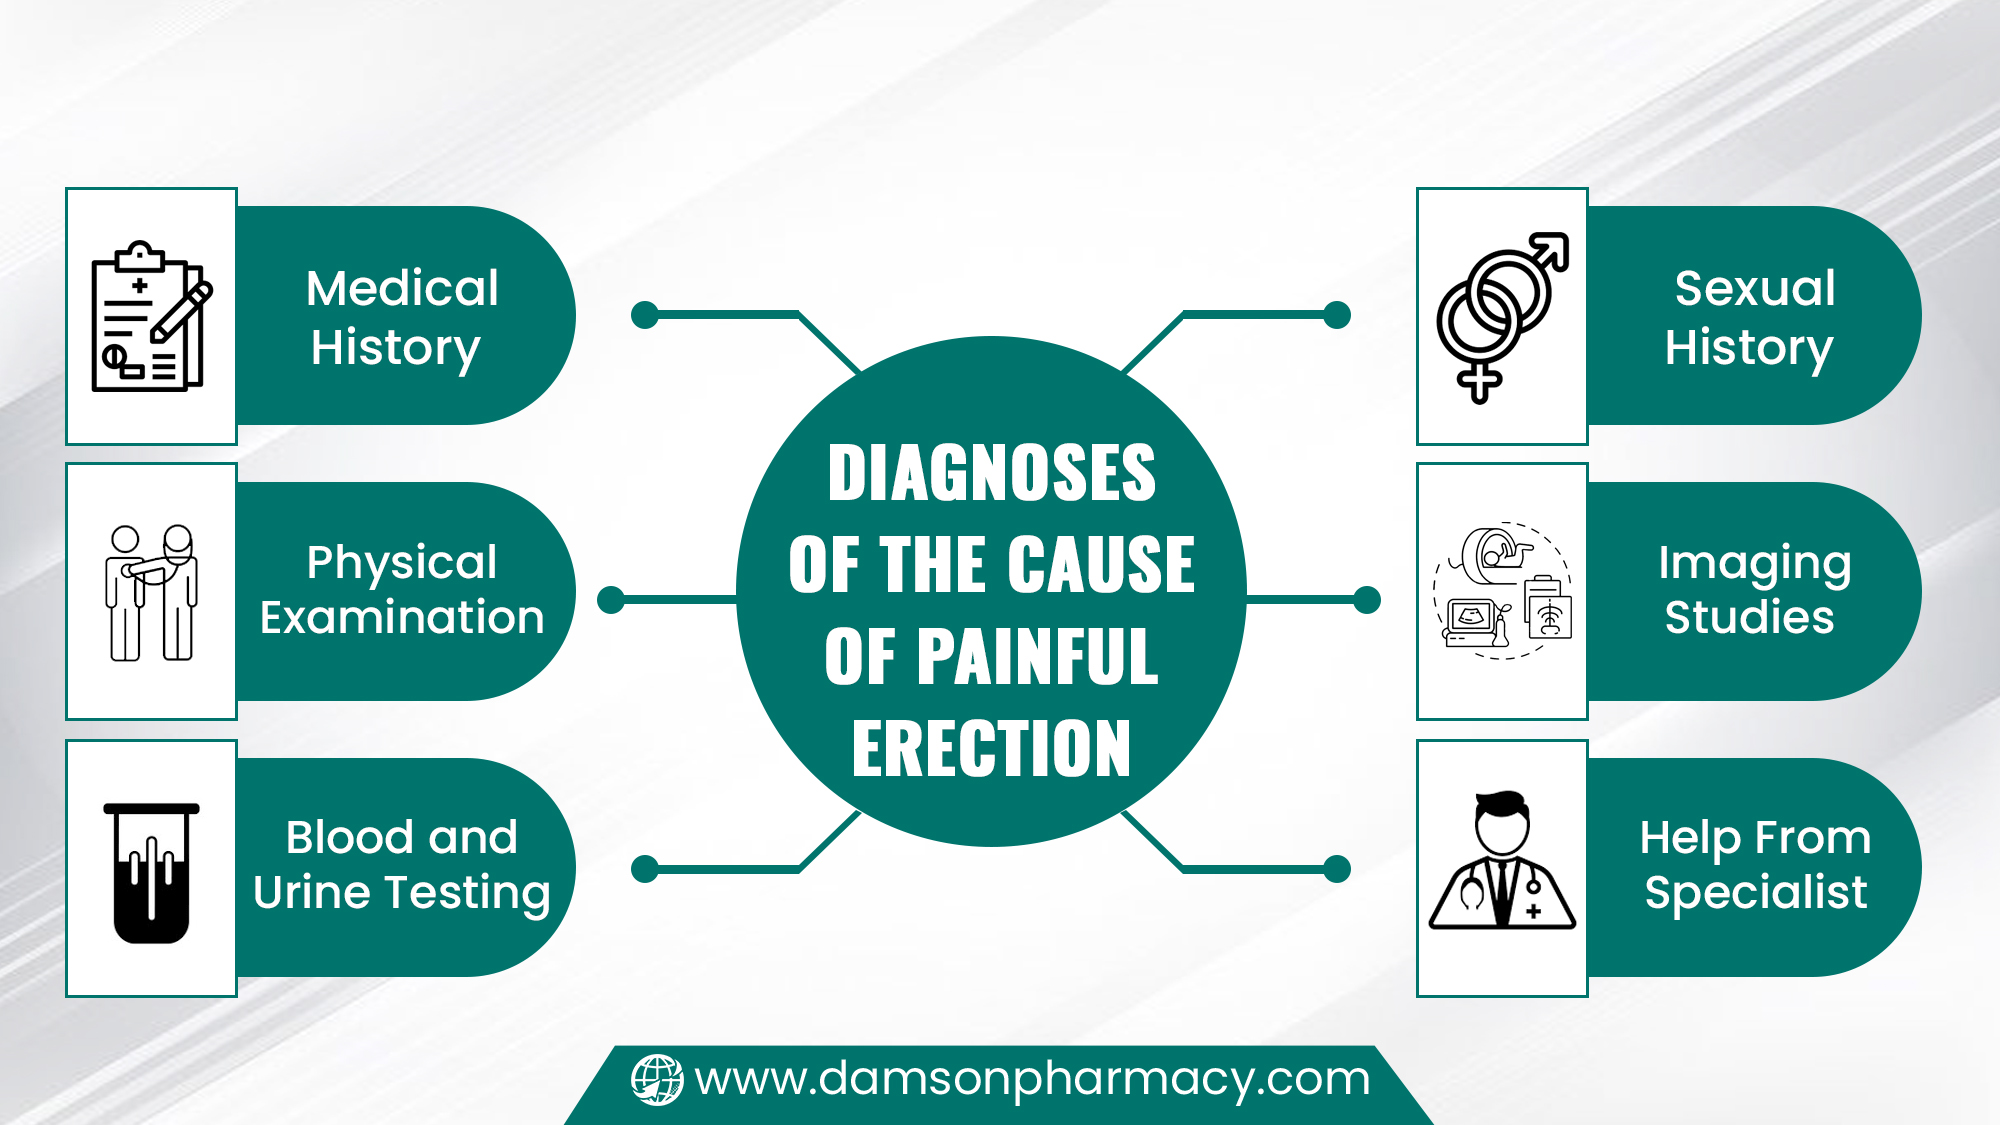 Diagnoses of the Cause of Painful Erection